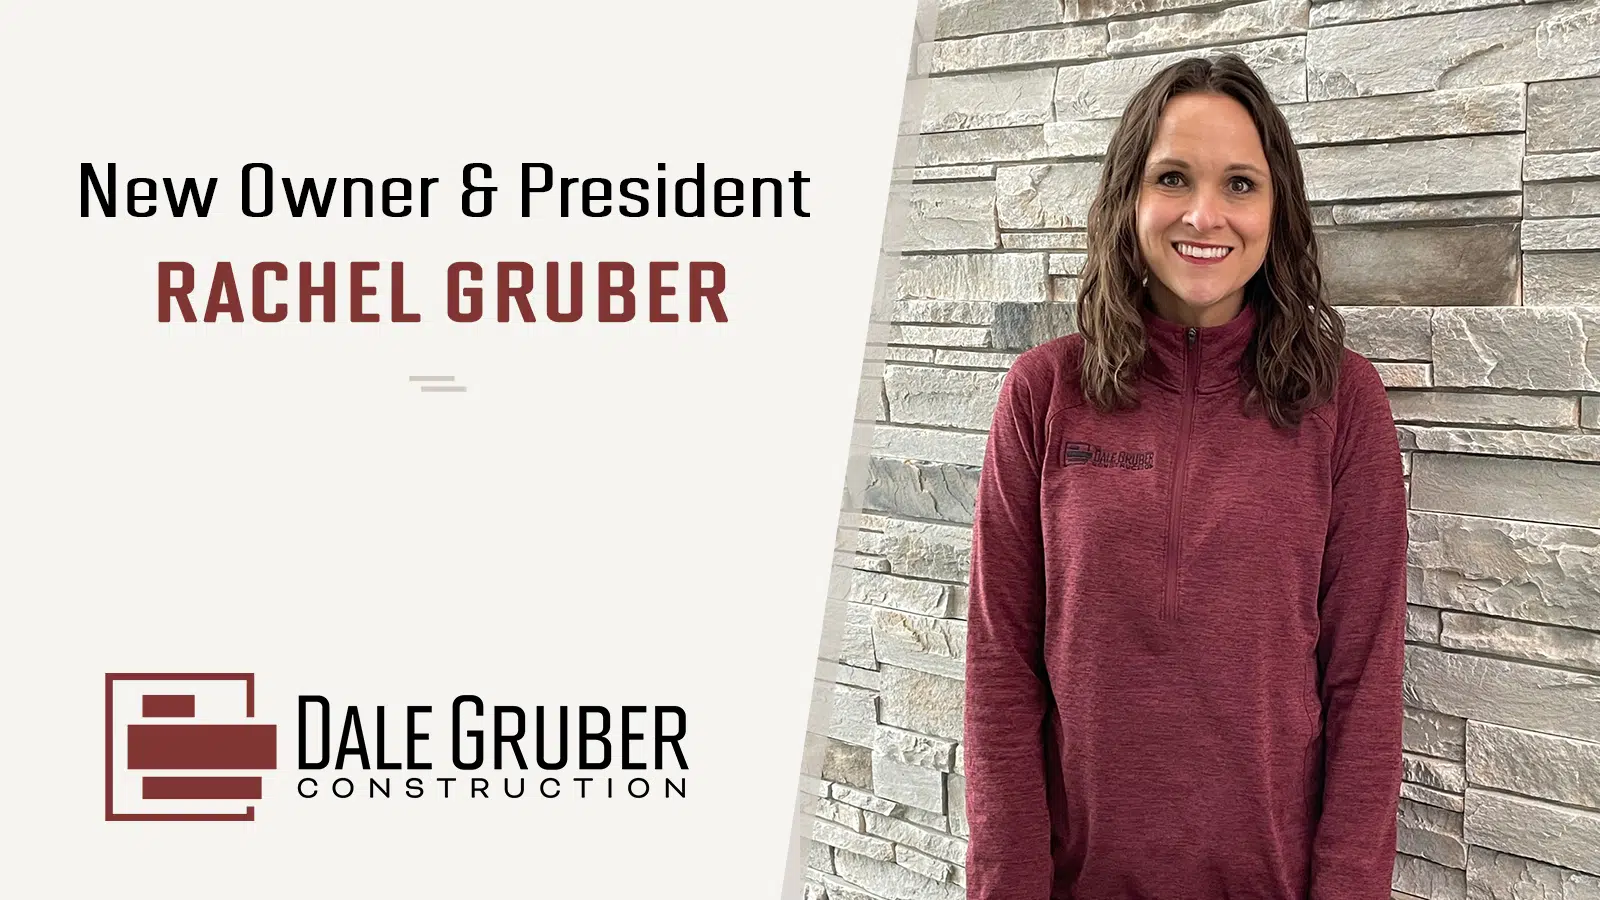 Dale Gruber Construction Announces New Owner!